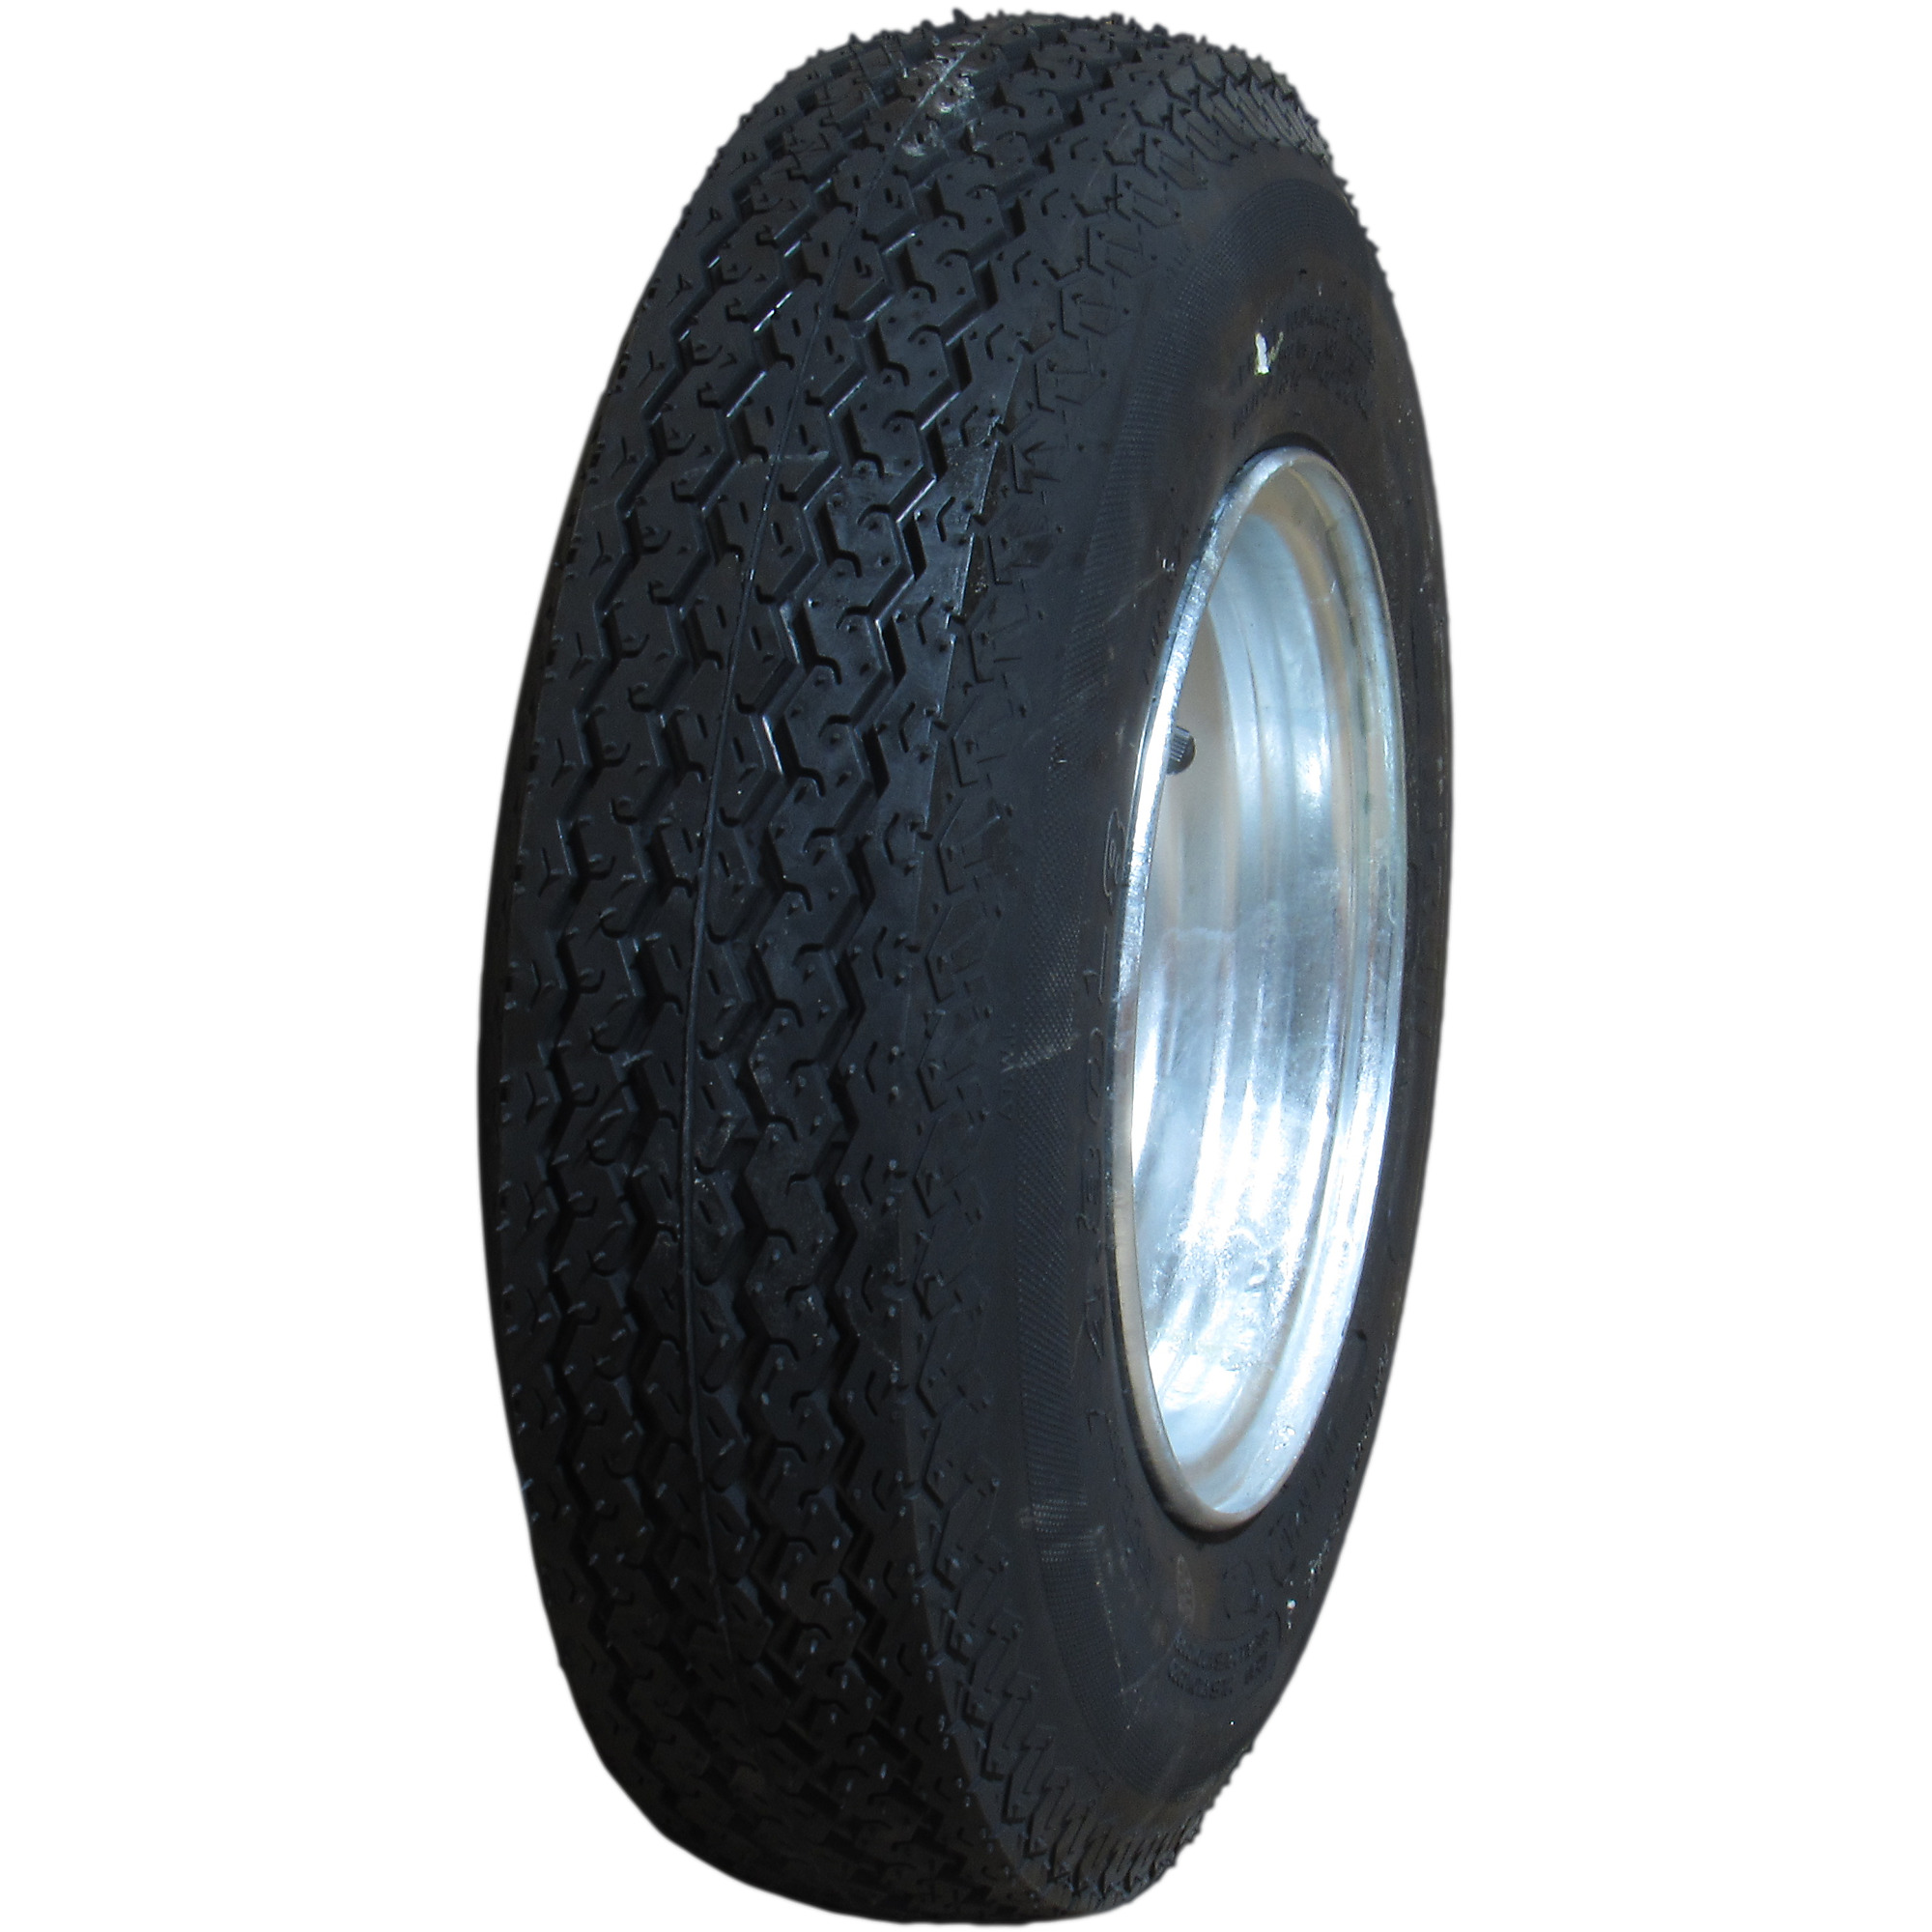 HI-RUN, Highway Trailer Tire Assembly, Galvanized, Tire Size 5.70-8 Load Range Rating B, Bolt Holes (qty.) 5 Model ASB1054